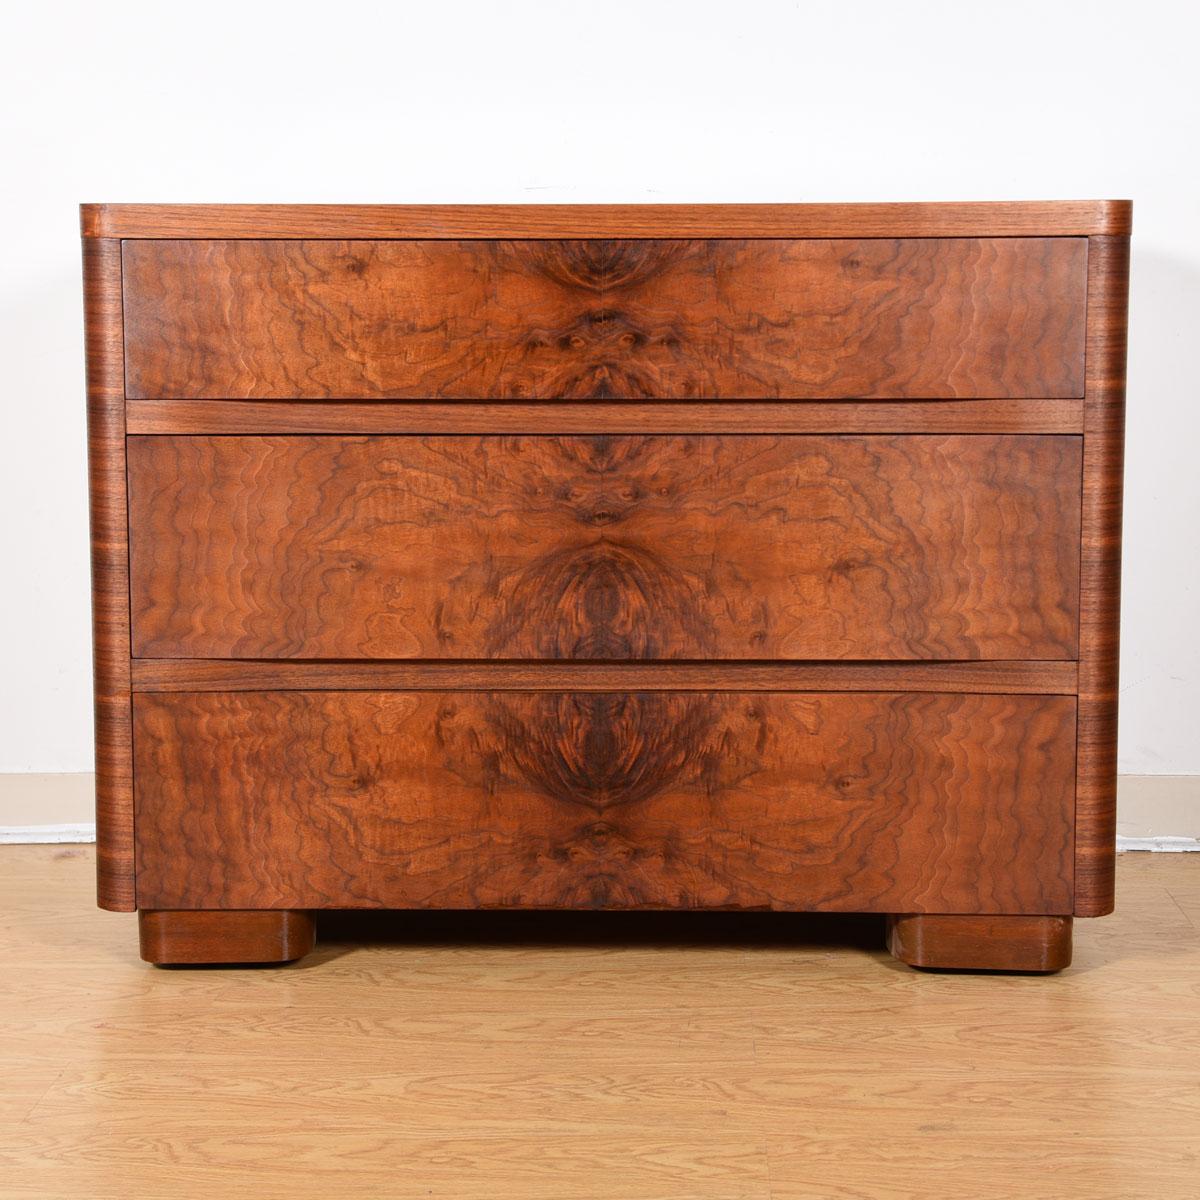 This 3-drawer chest features drop-dead gorgeous burled walnut on its front. Nicely sized with deep drawers, this will provide wonderful storage and make a statement wherever you choose to place it.

